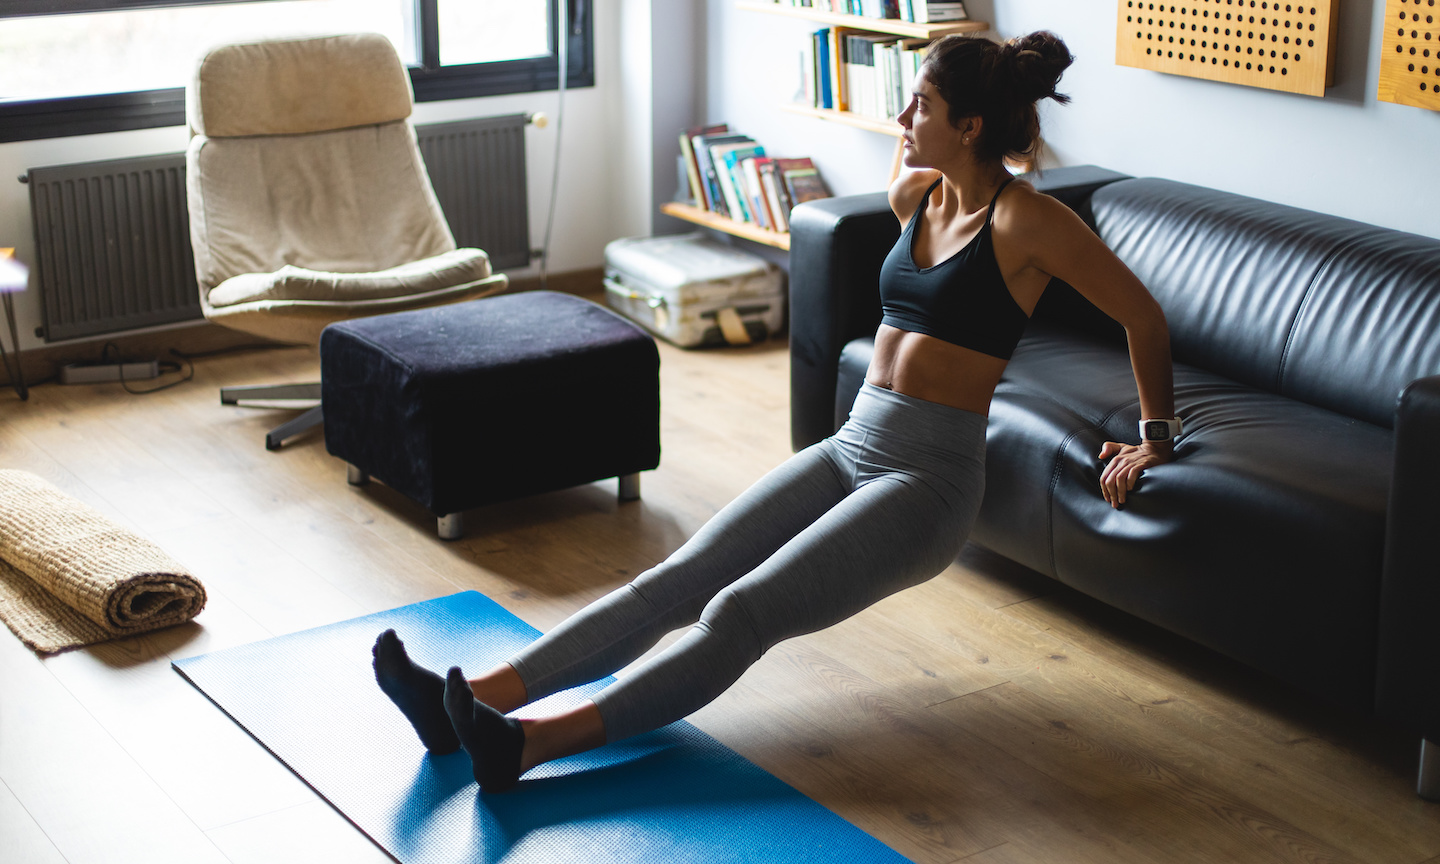 Everything You Need to Know About Working Out at Home